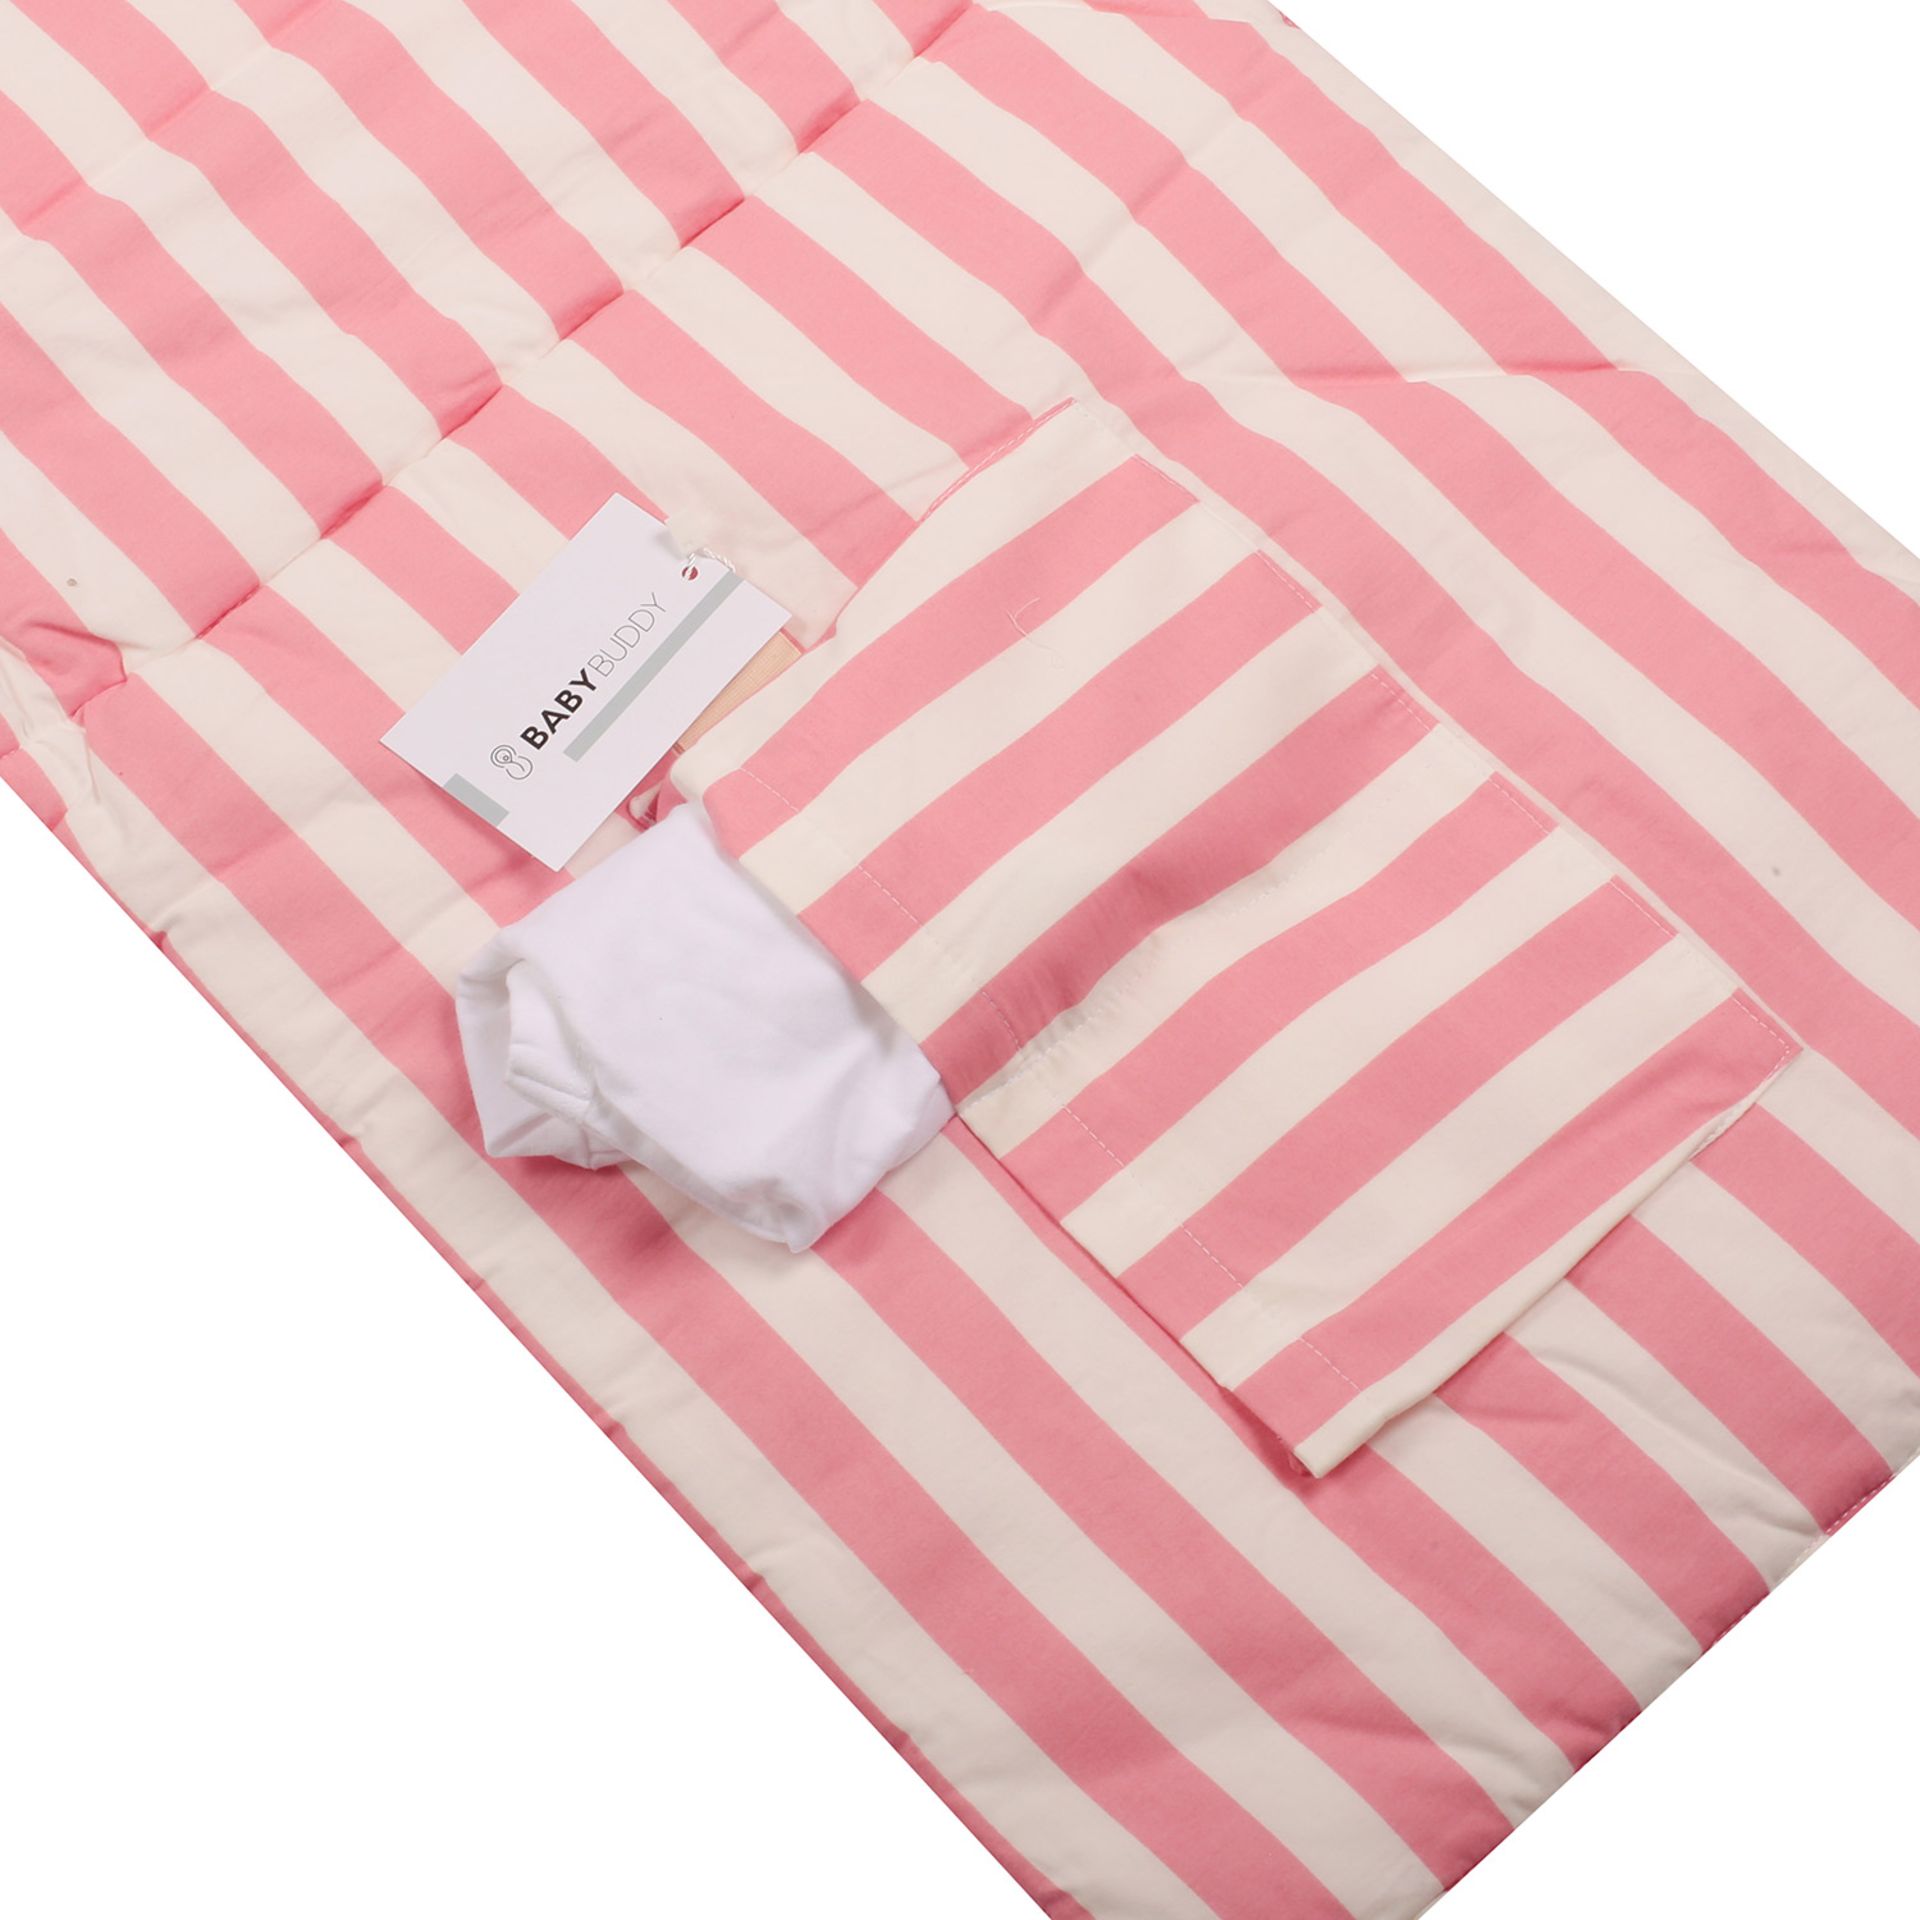 36 Baby Padded Cot Liners | Crib Rail Cover One-Piece Bumper Cot Bumper (RRP 29.99 Each) - Image 17 of 17